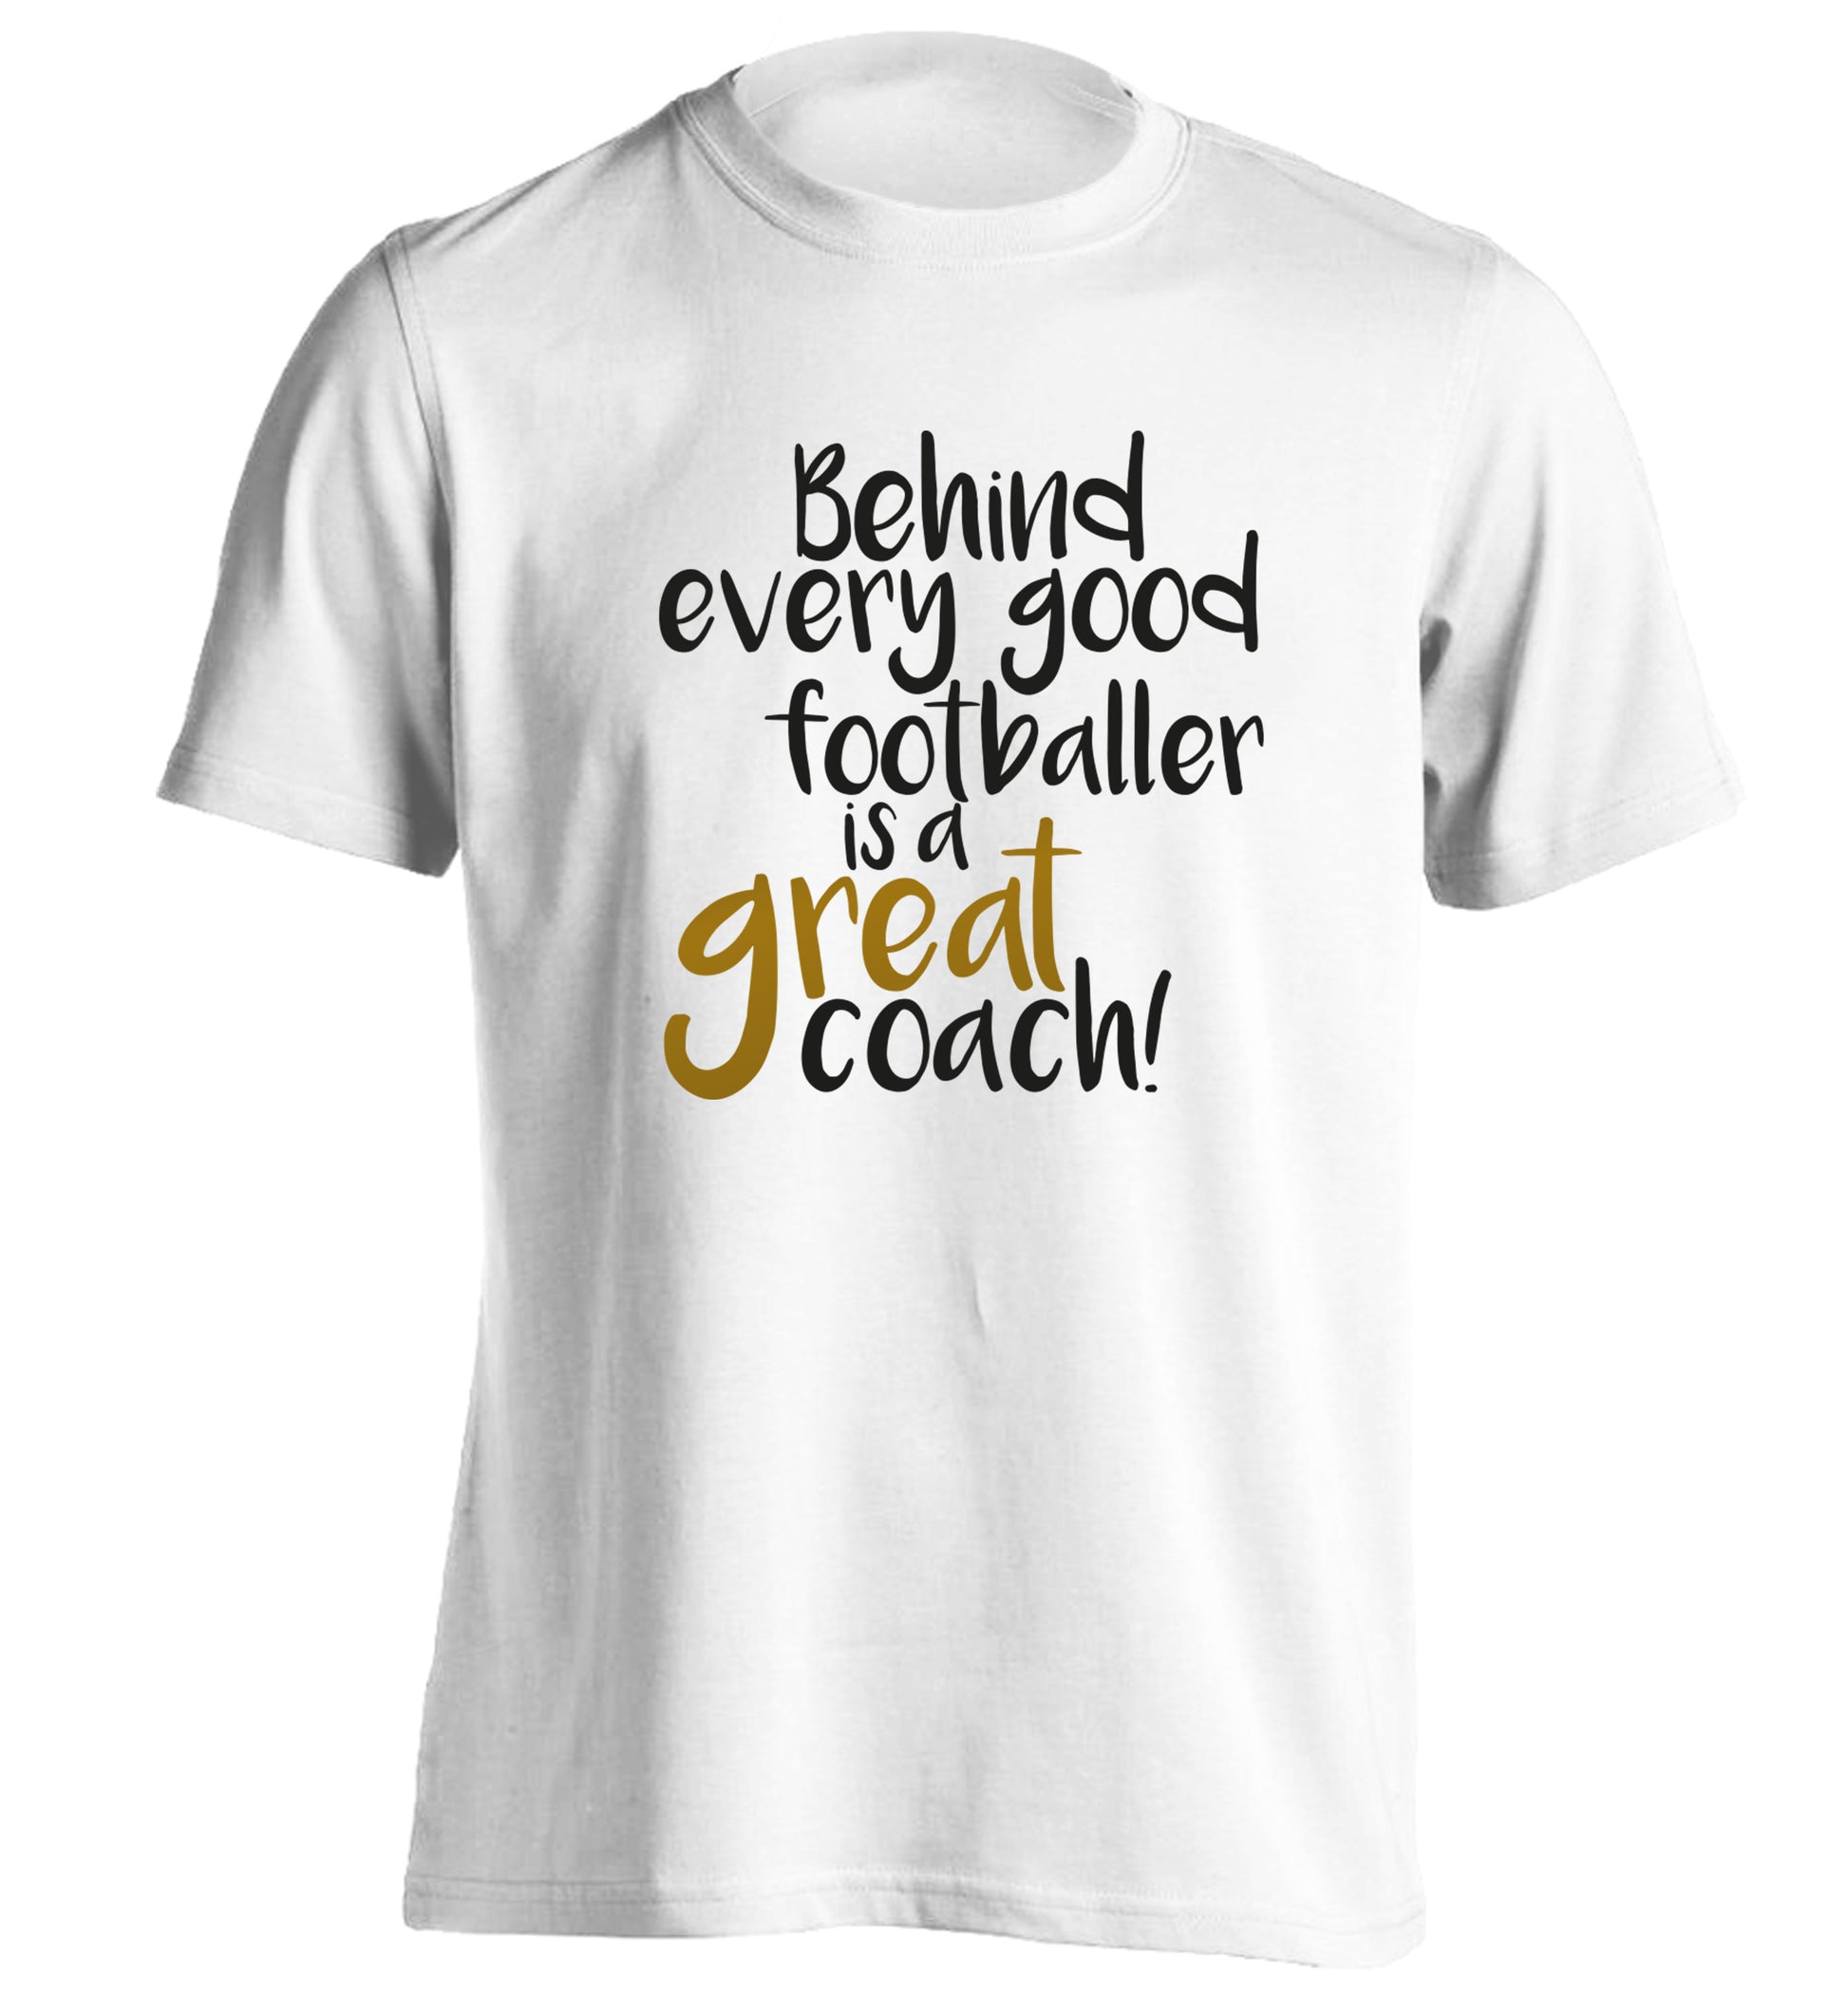 Behind every good footballer is a great coach! adults unisexwhite Tshirt 2XL